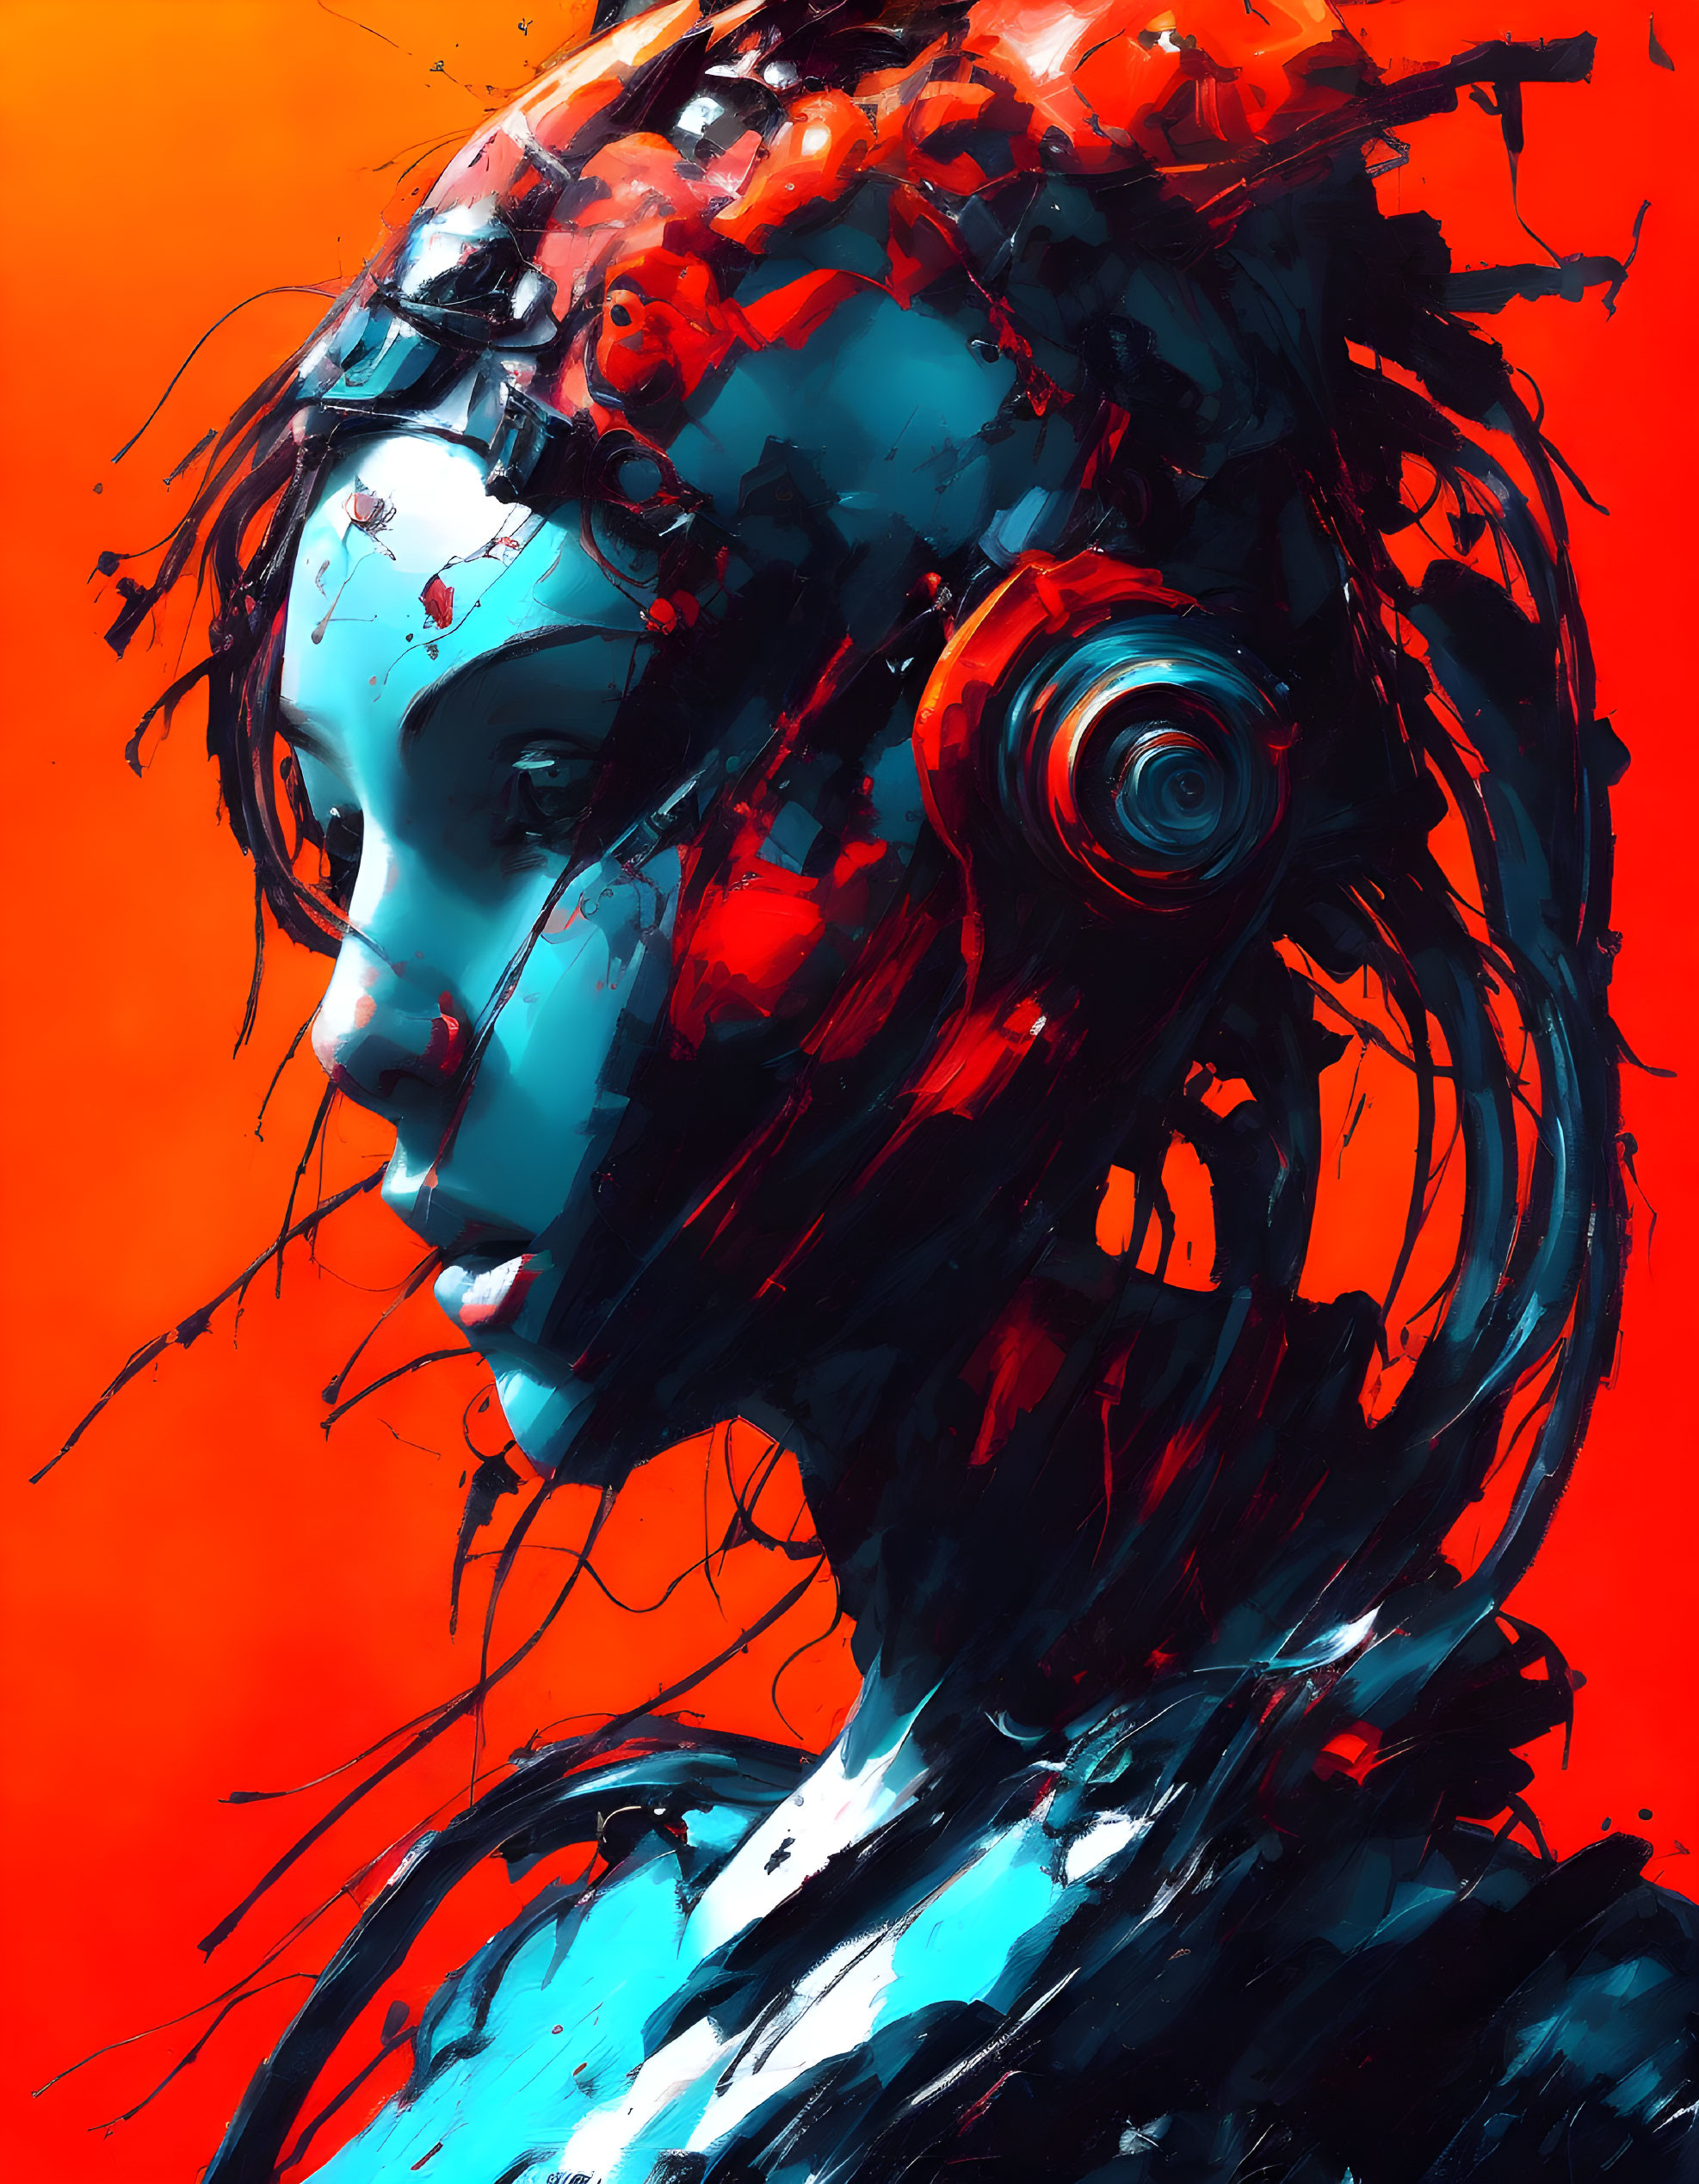 Colorful digital artwork of female figure with cybernetic elements in red and blue.